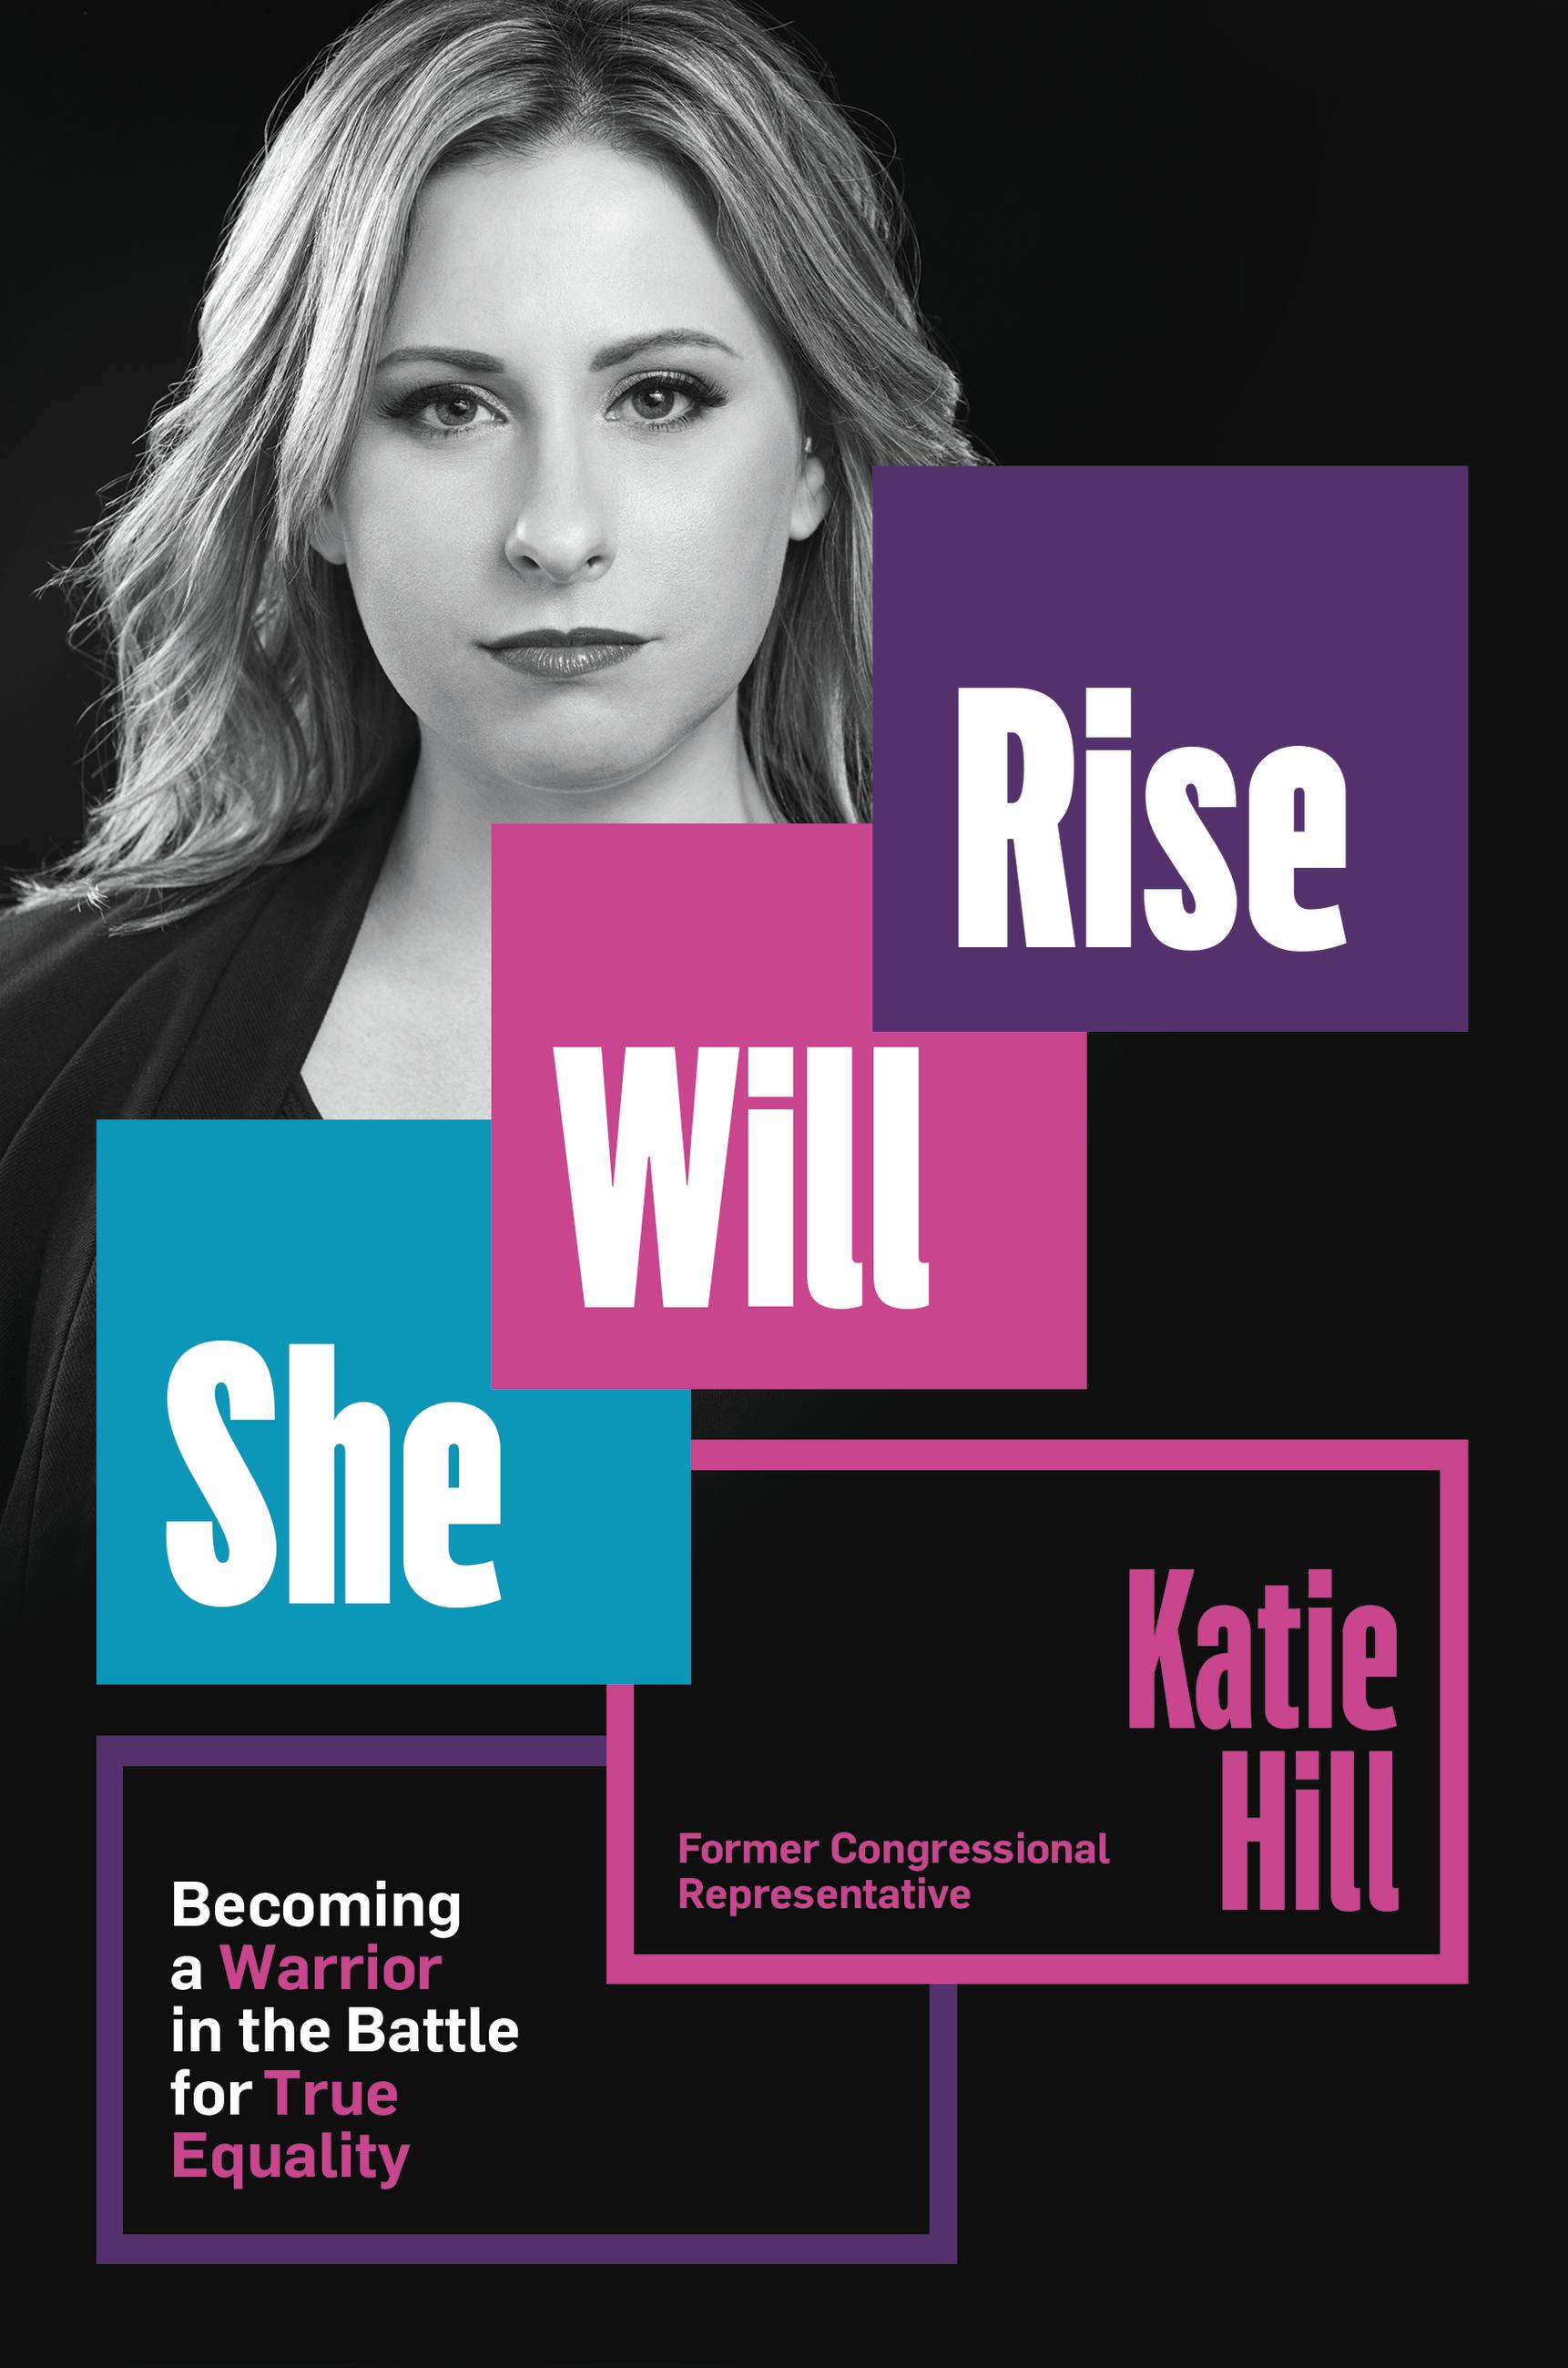 Katie Bell Model - She Will Rise by Katie Hill | Hachette Book Group